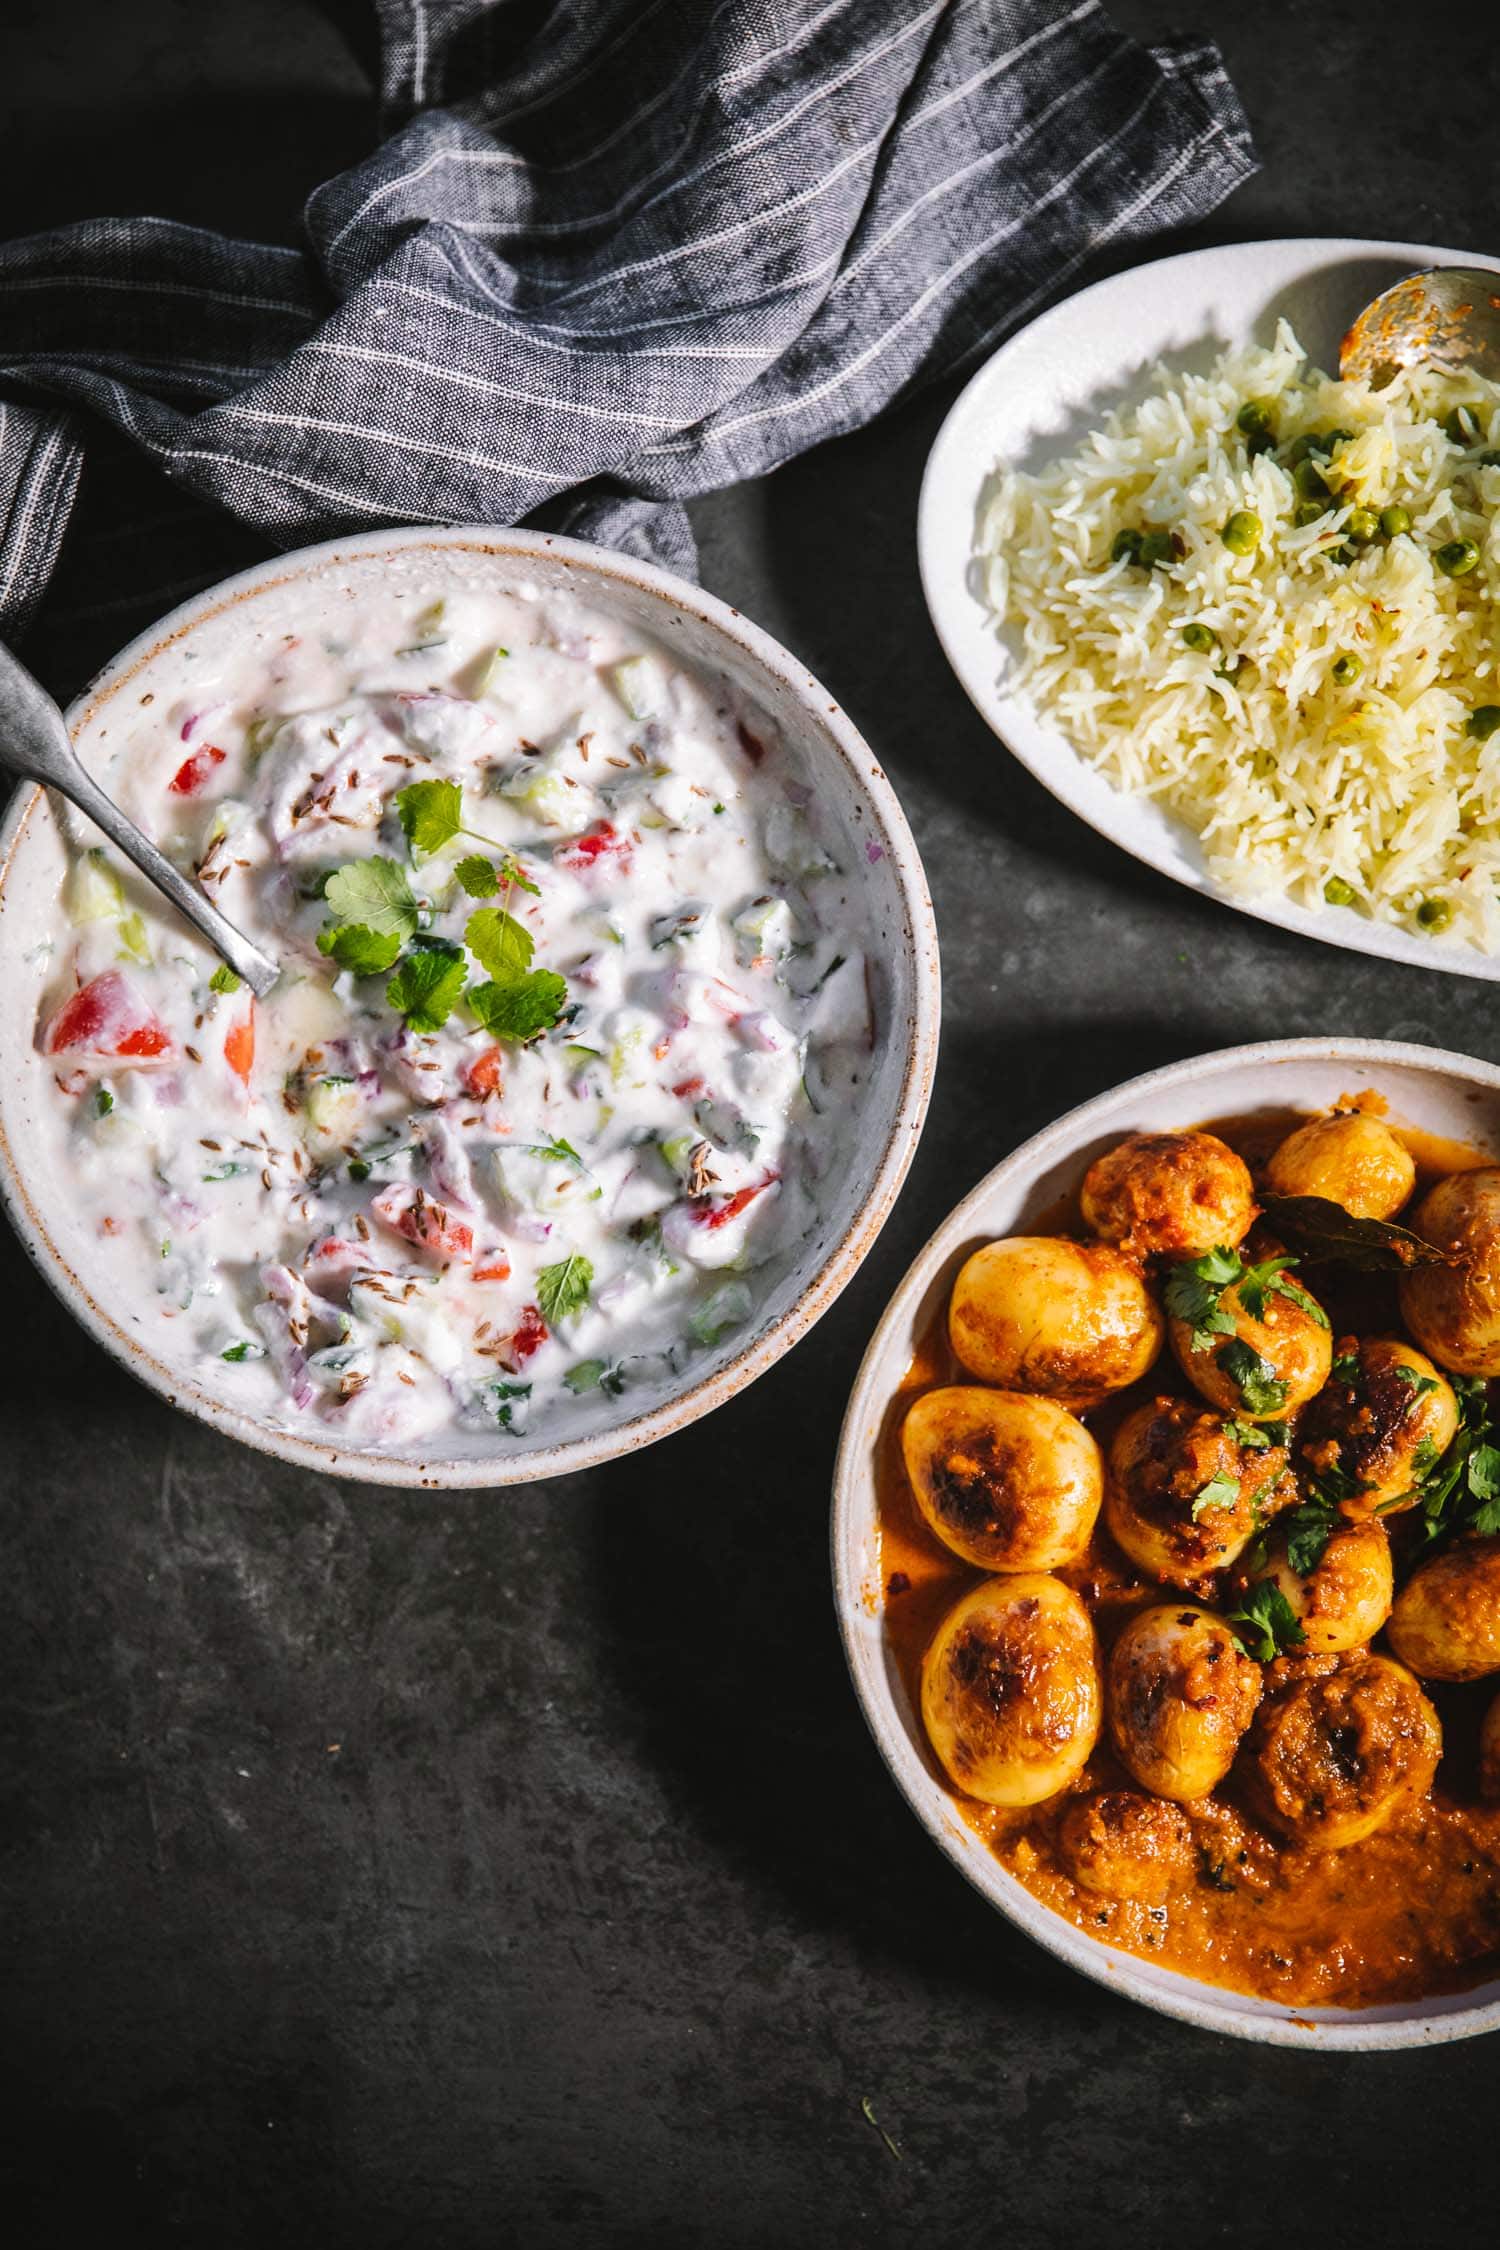 Cold Vegetable Raita served as a side dish with an Indian feast